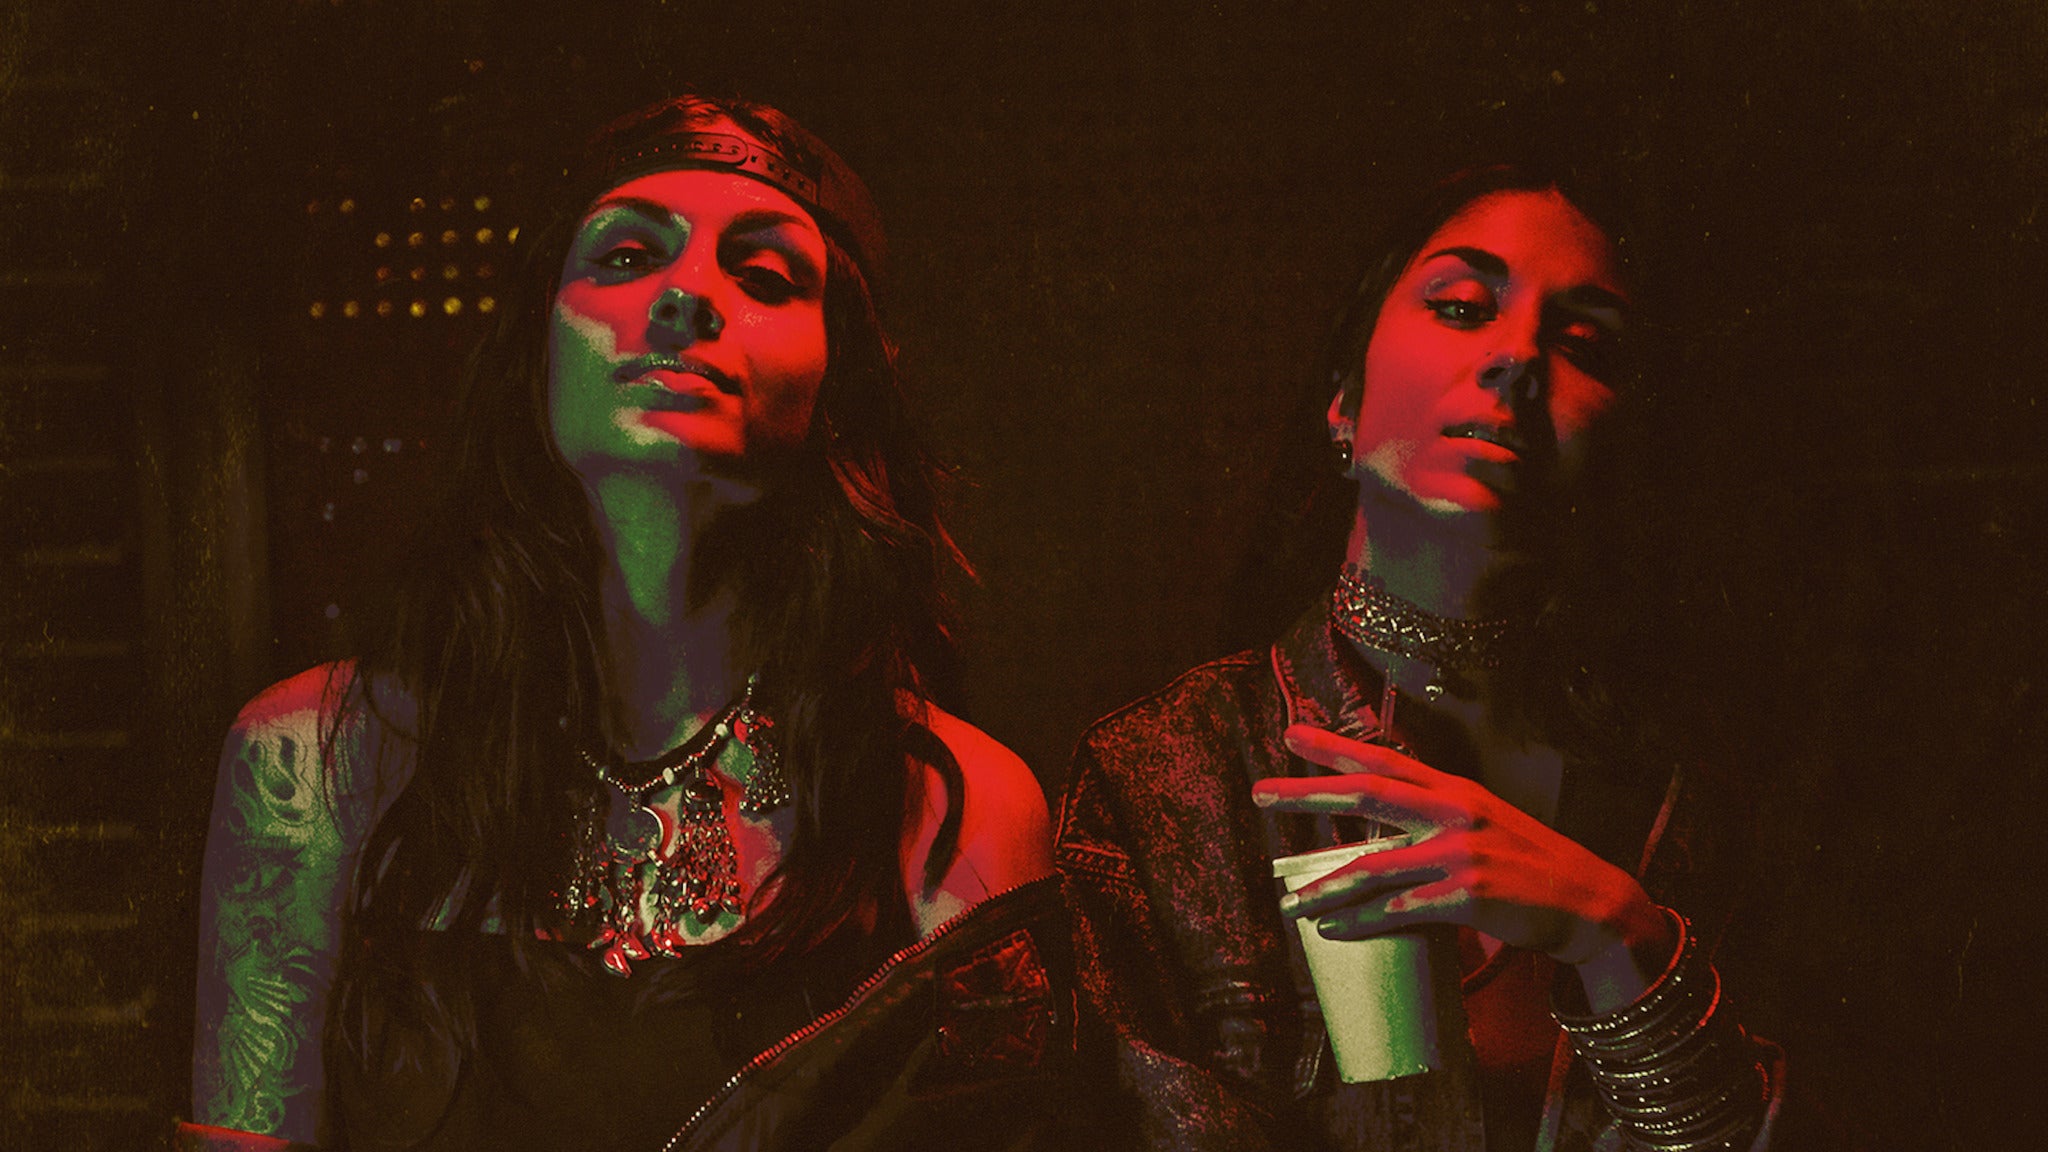 Krewella - New World Tour presented by SiriusXM BPM in St Louis promo photo for Ticketmaster presale offer code